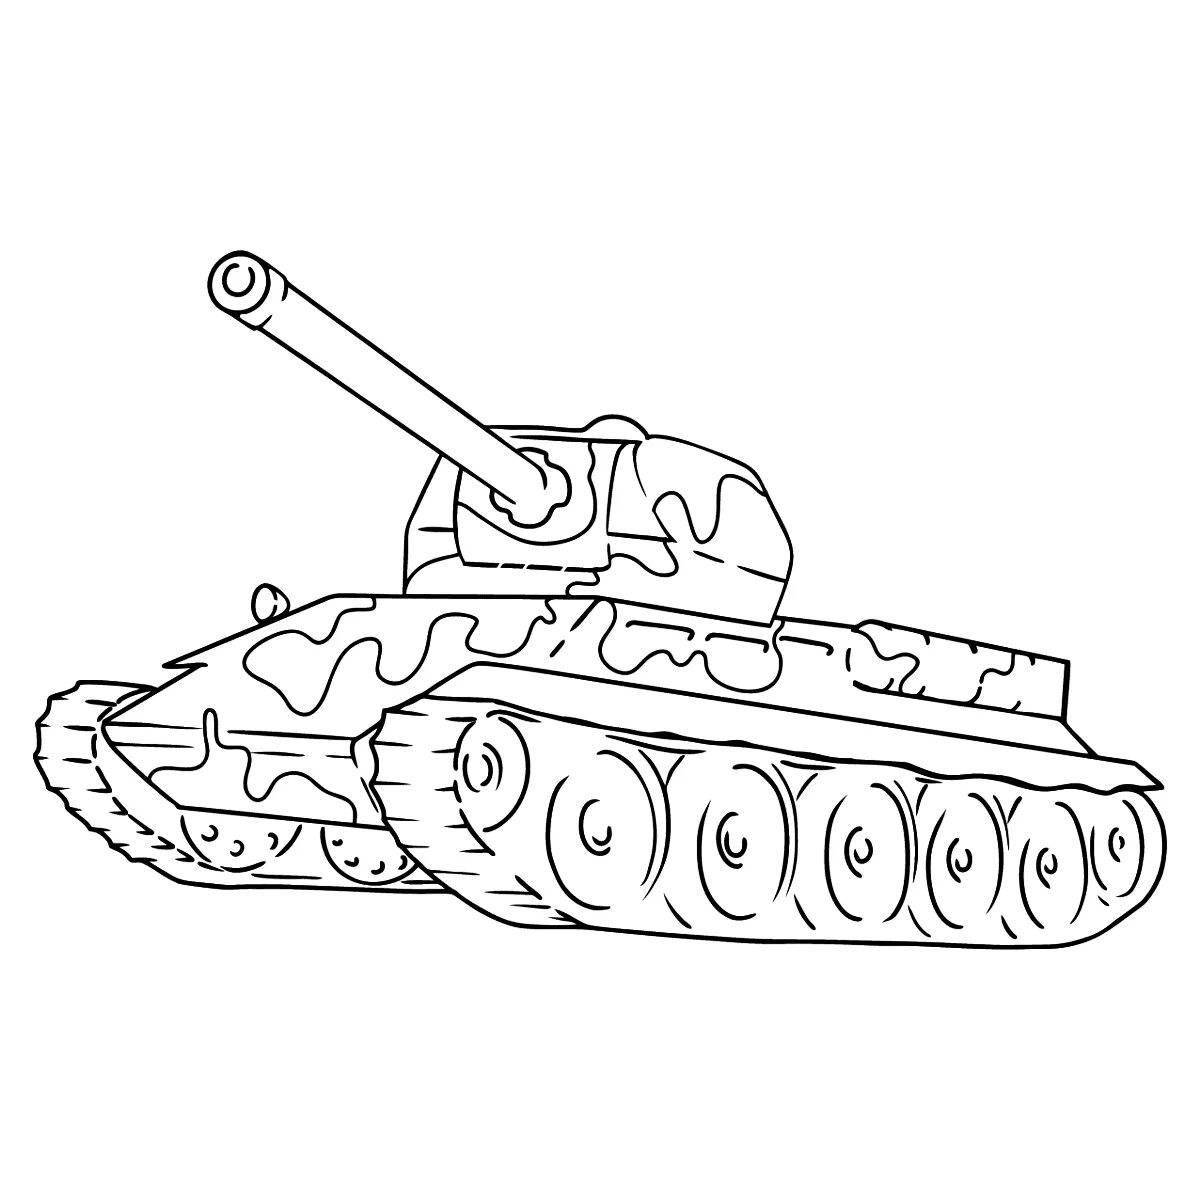 Bright cartoon tank coloring for kids